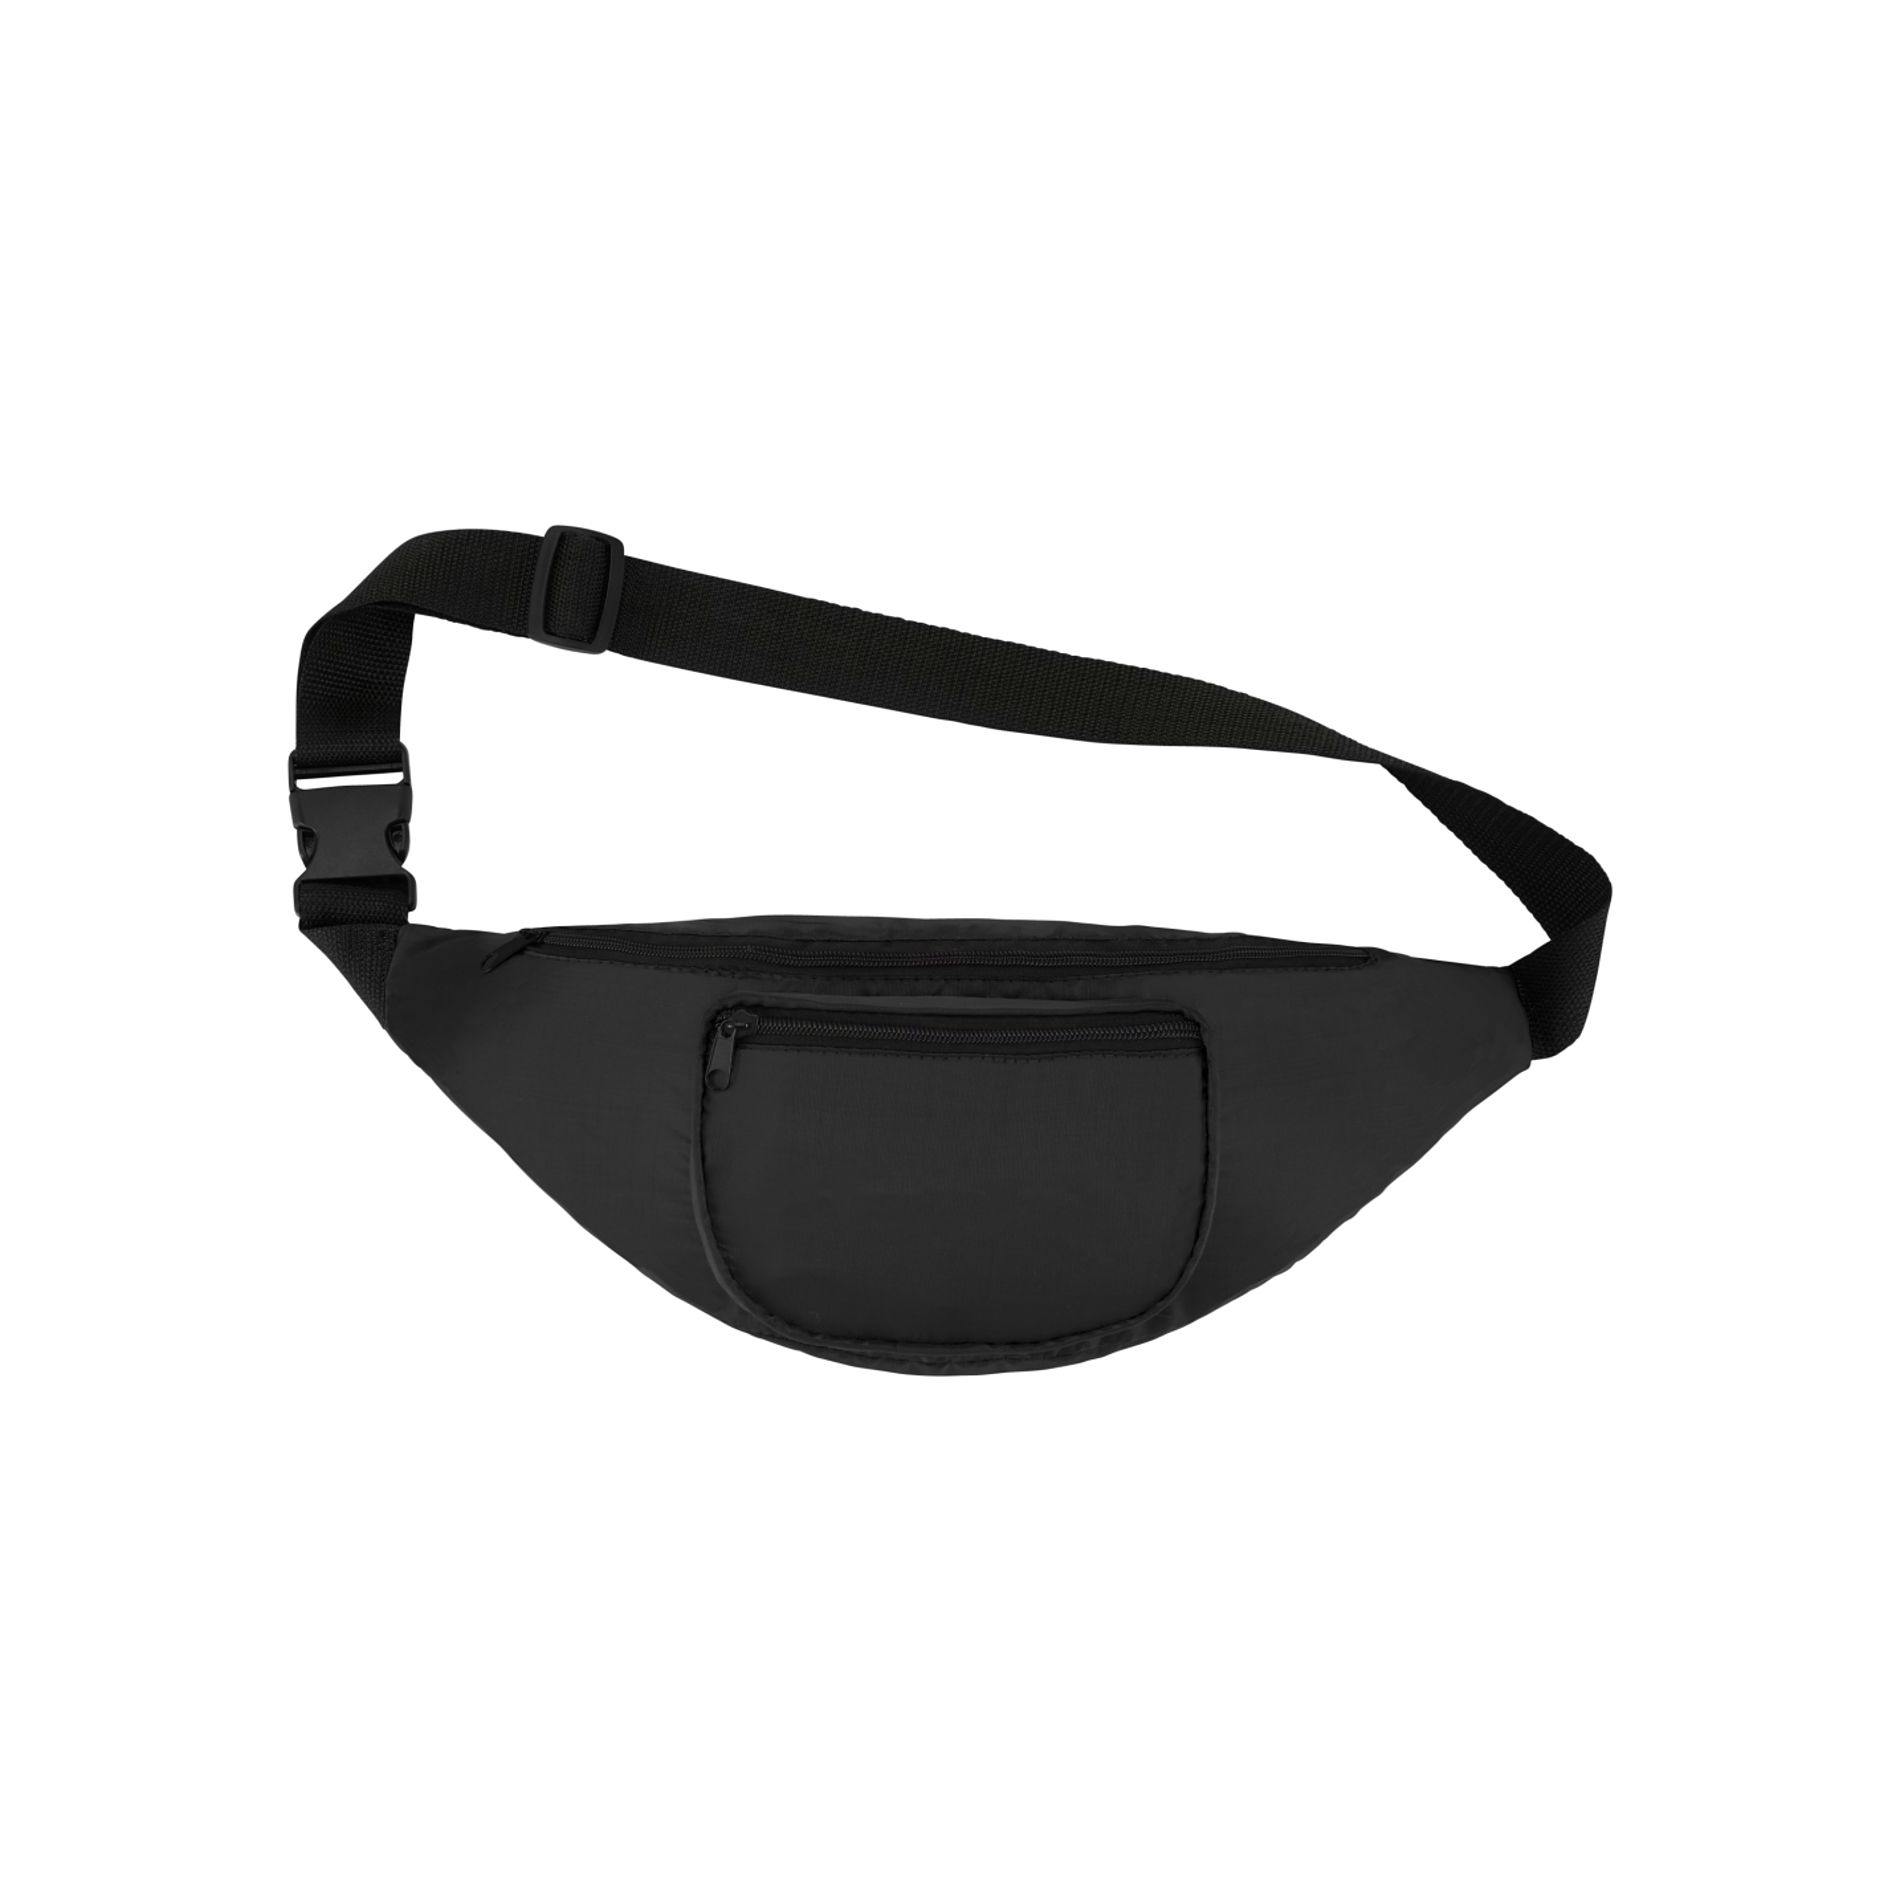 Hipster Deluxe Fanny Pack - additional Image 5